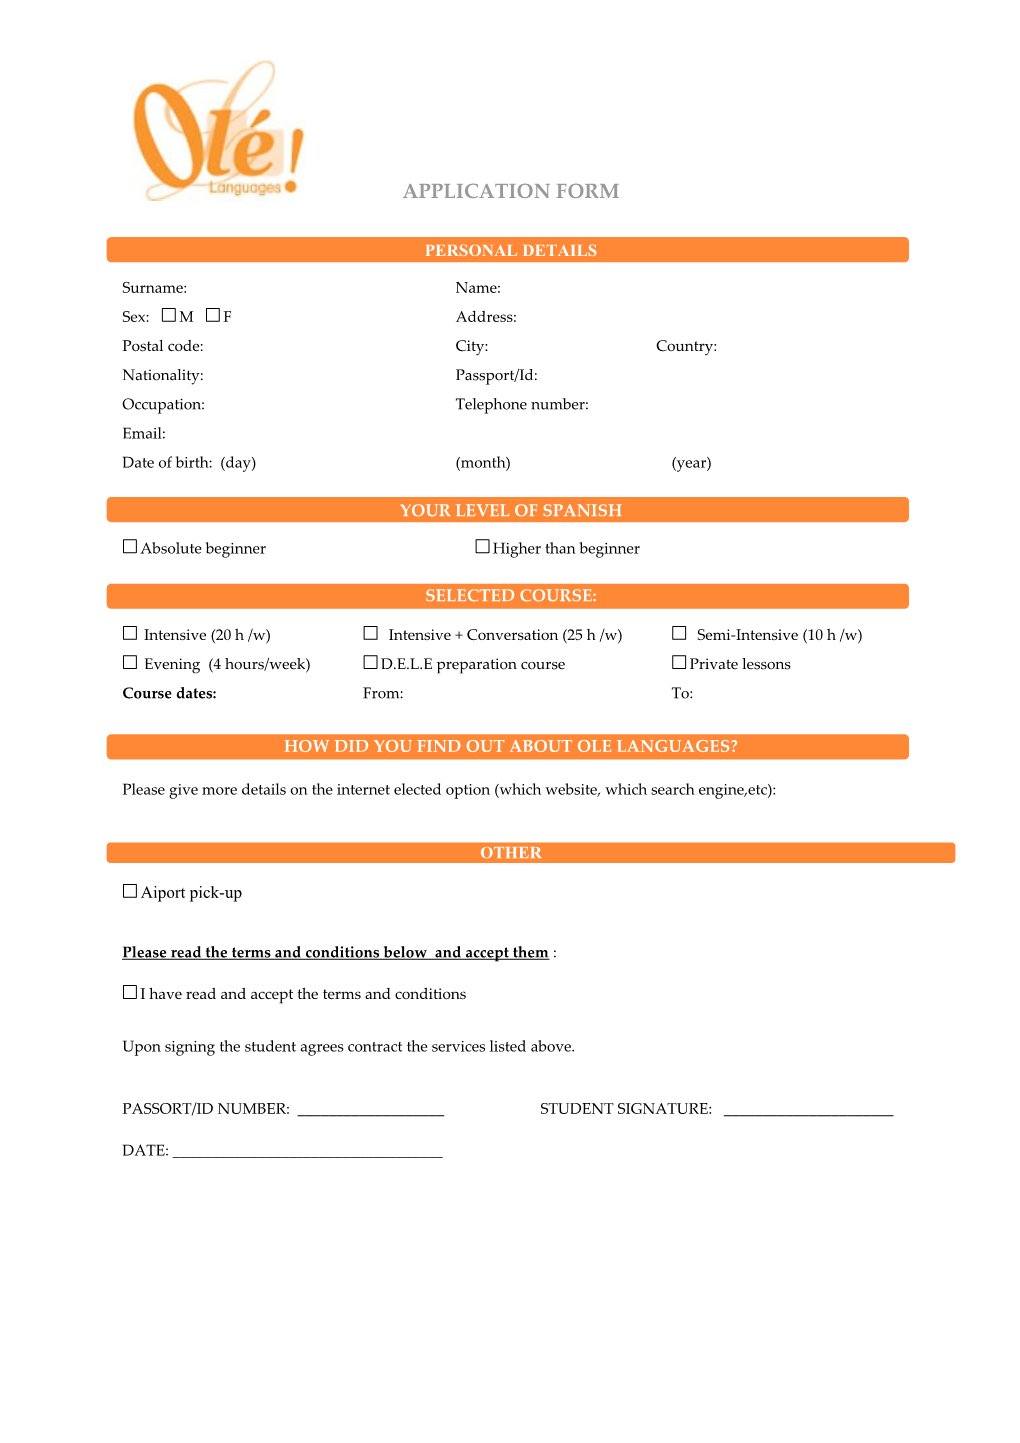 Application Form s39